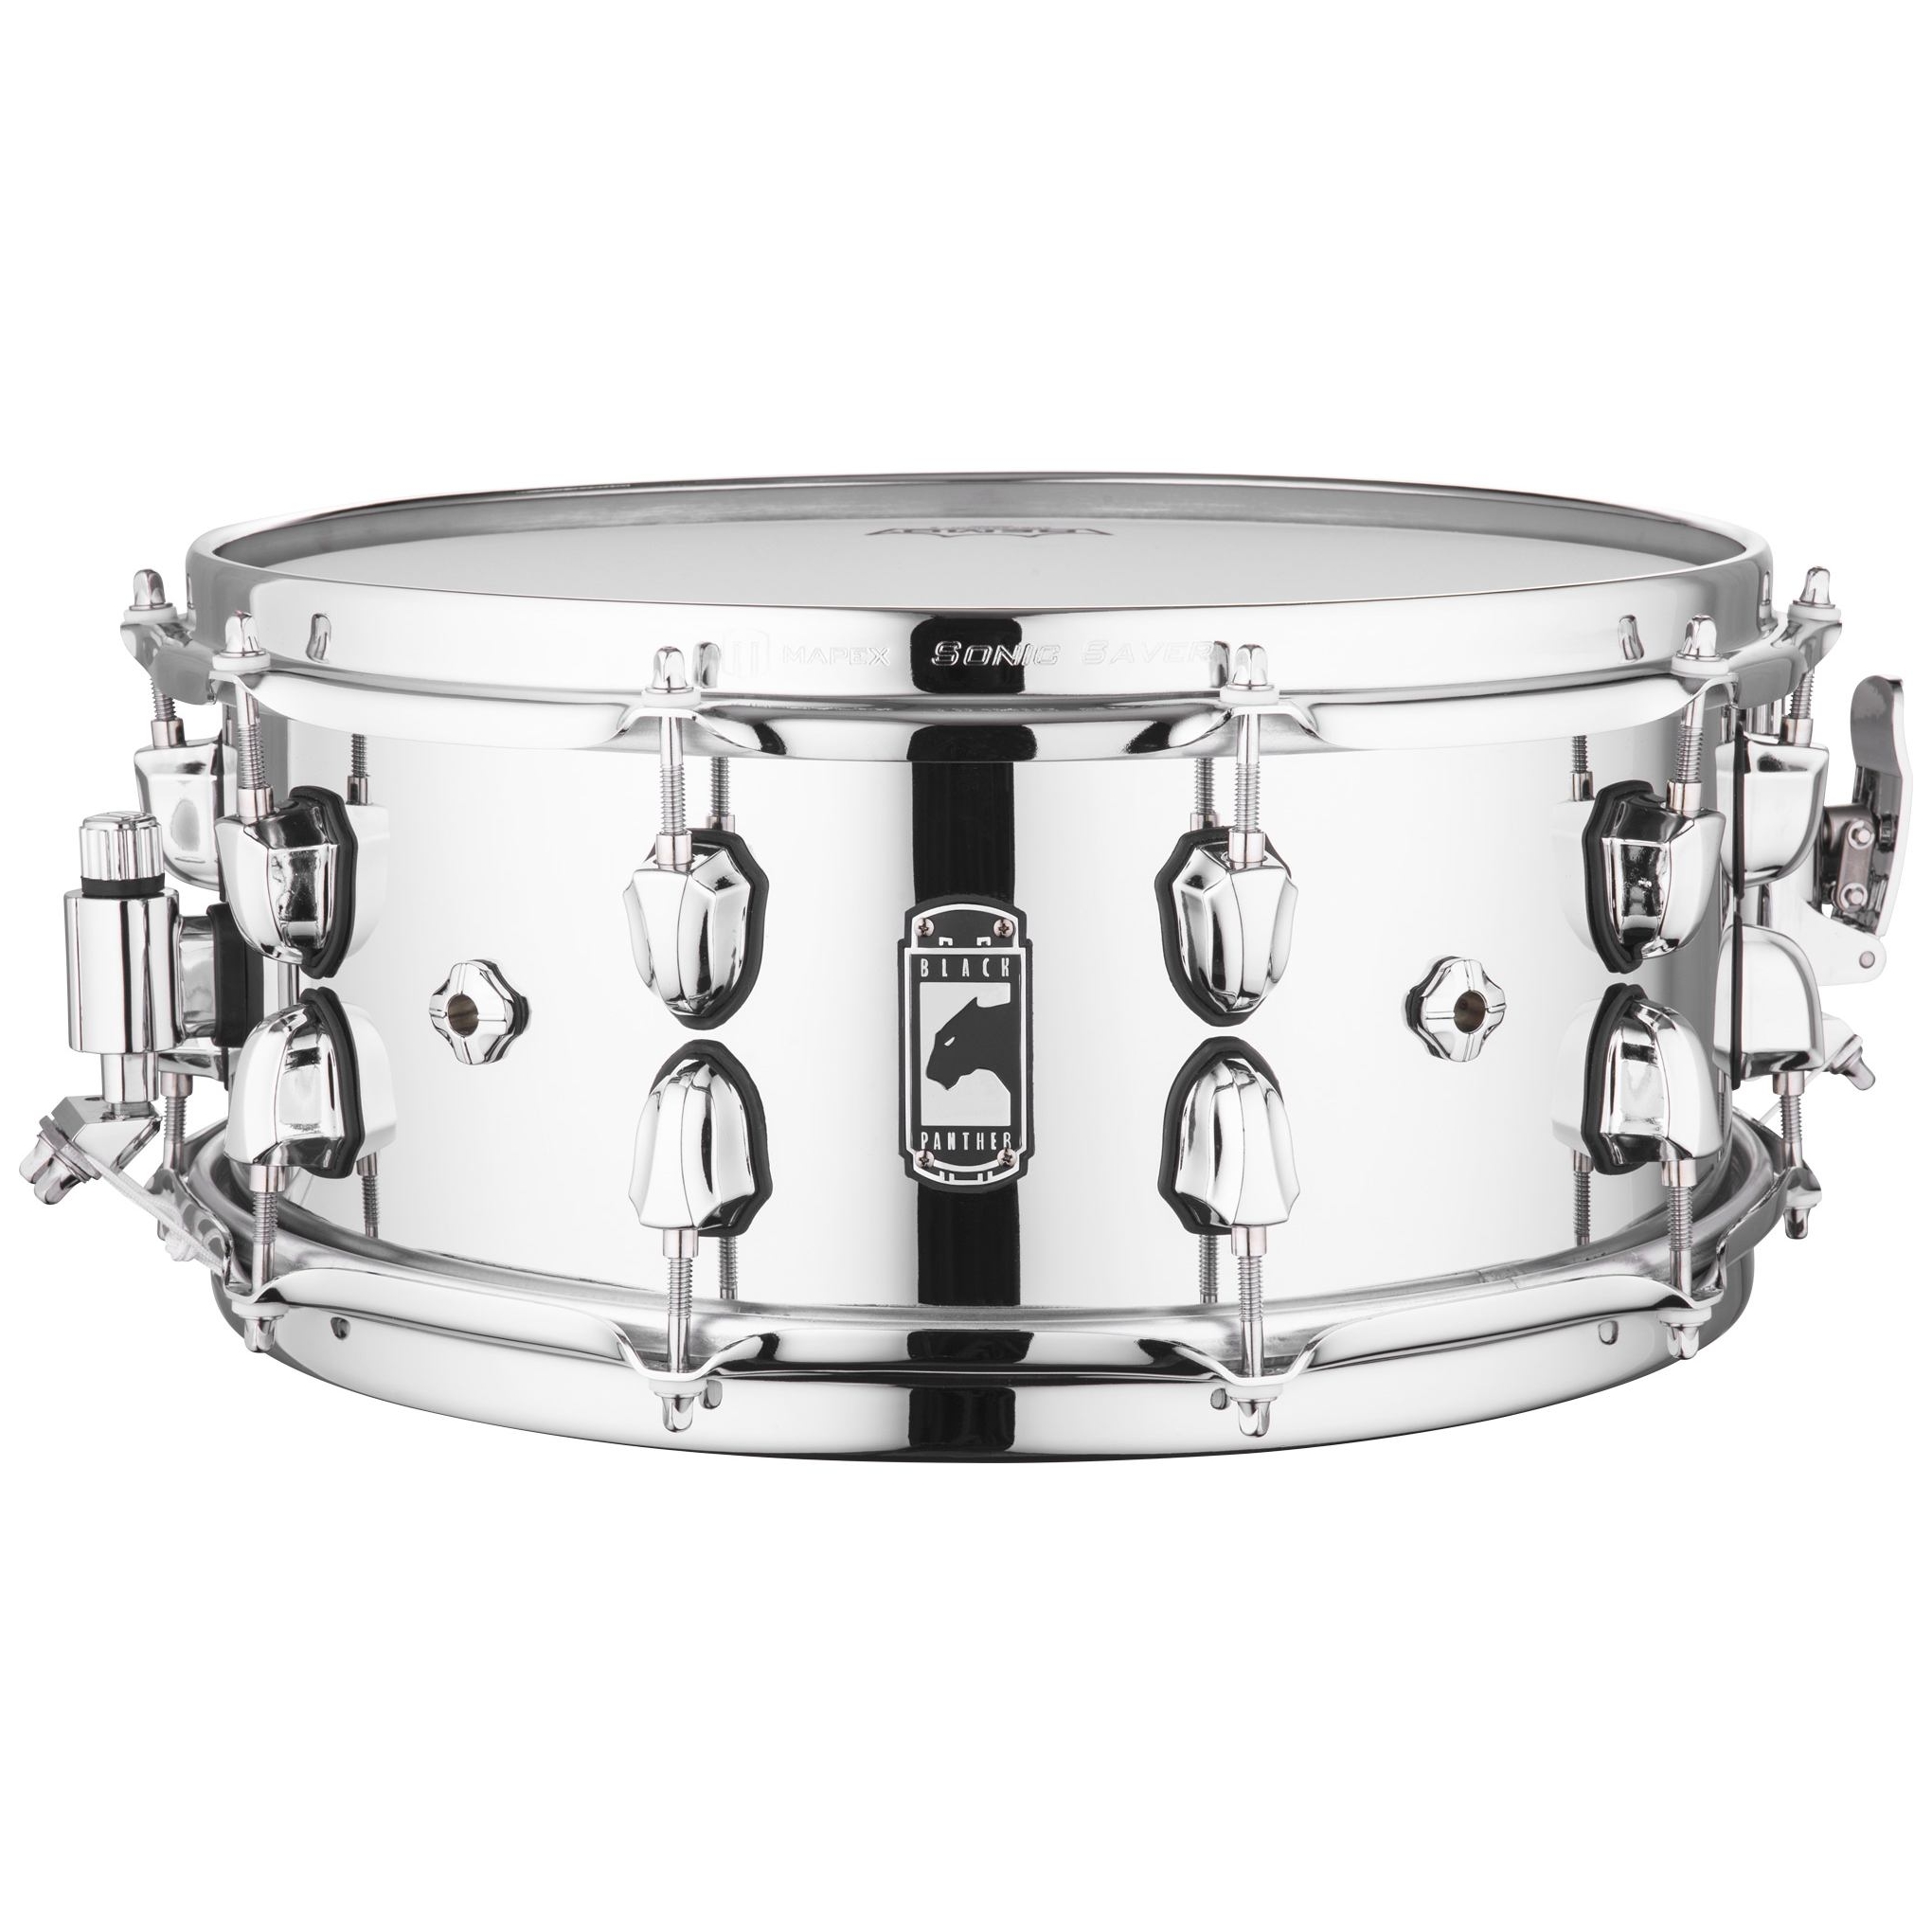 Mapex Black Panther Cyrus Steel Snare - 14 x 6 Zoll